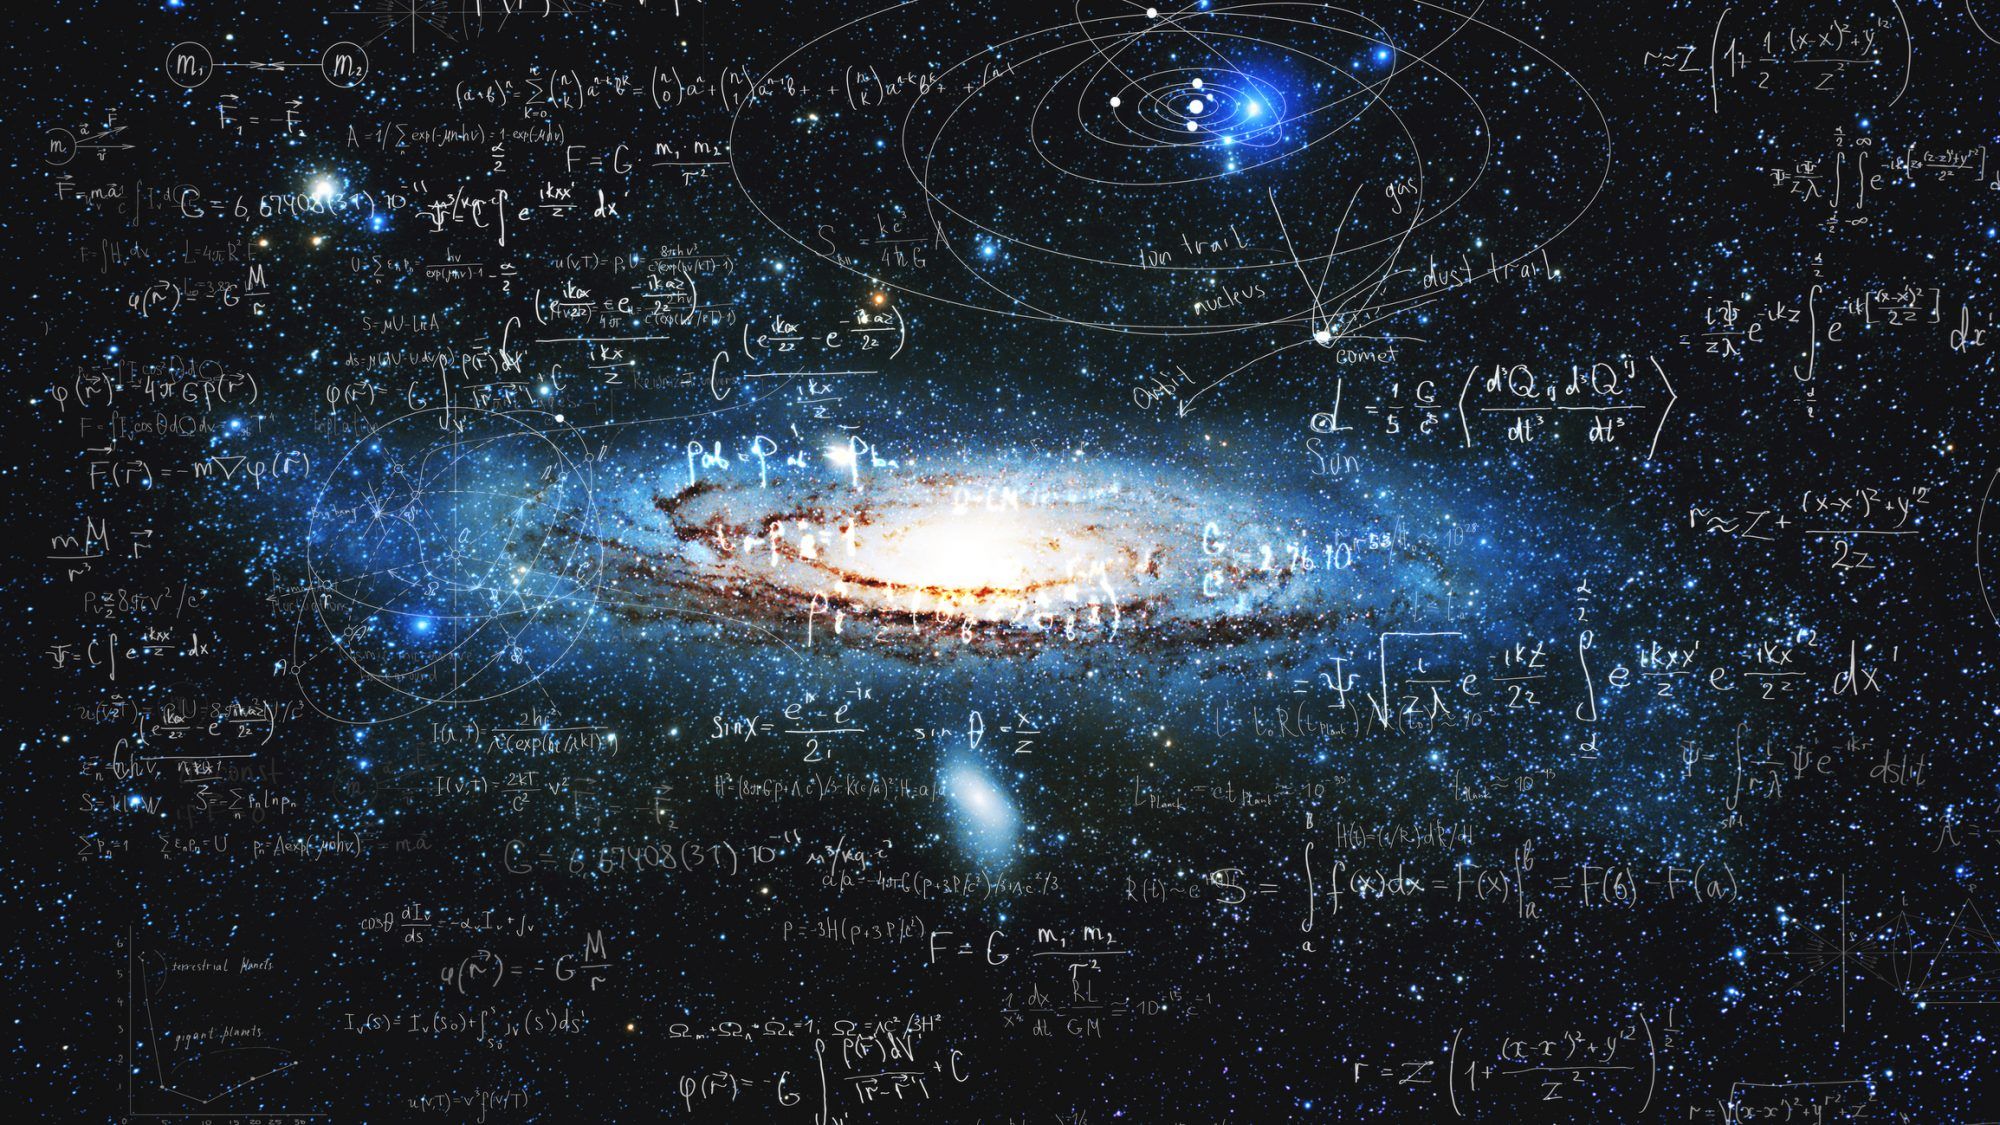 How I'm hacking my way into learning Astrophysics at Caltech